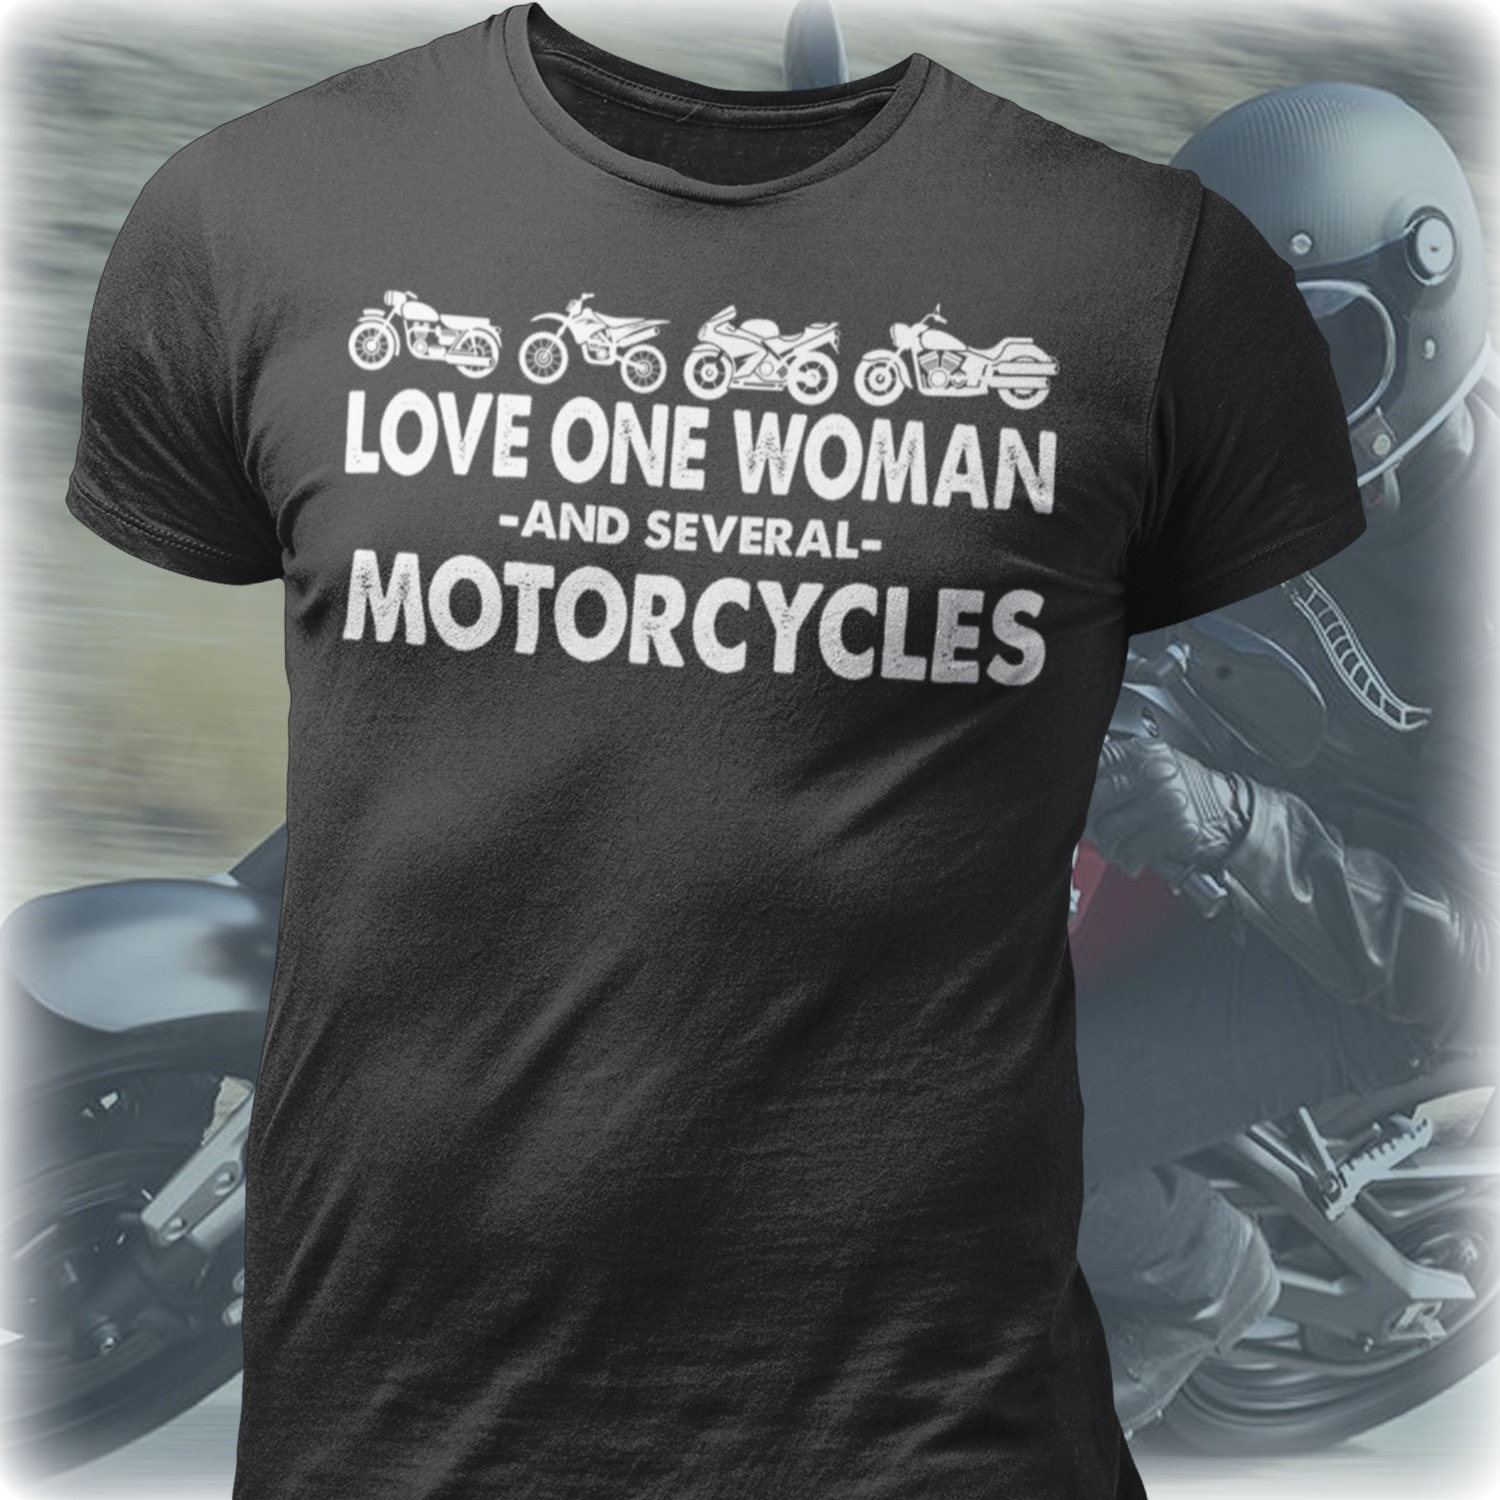 Love one woman and several motorcycles